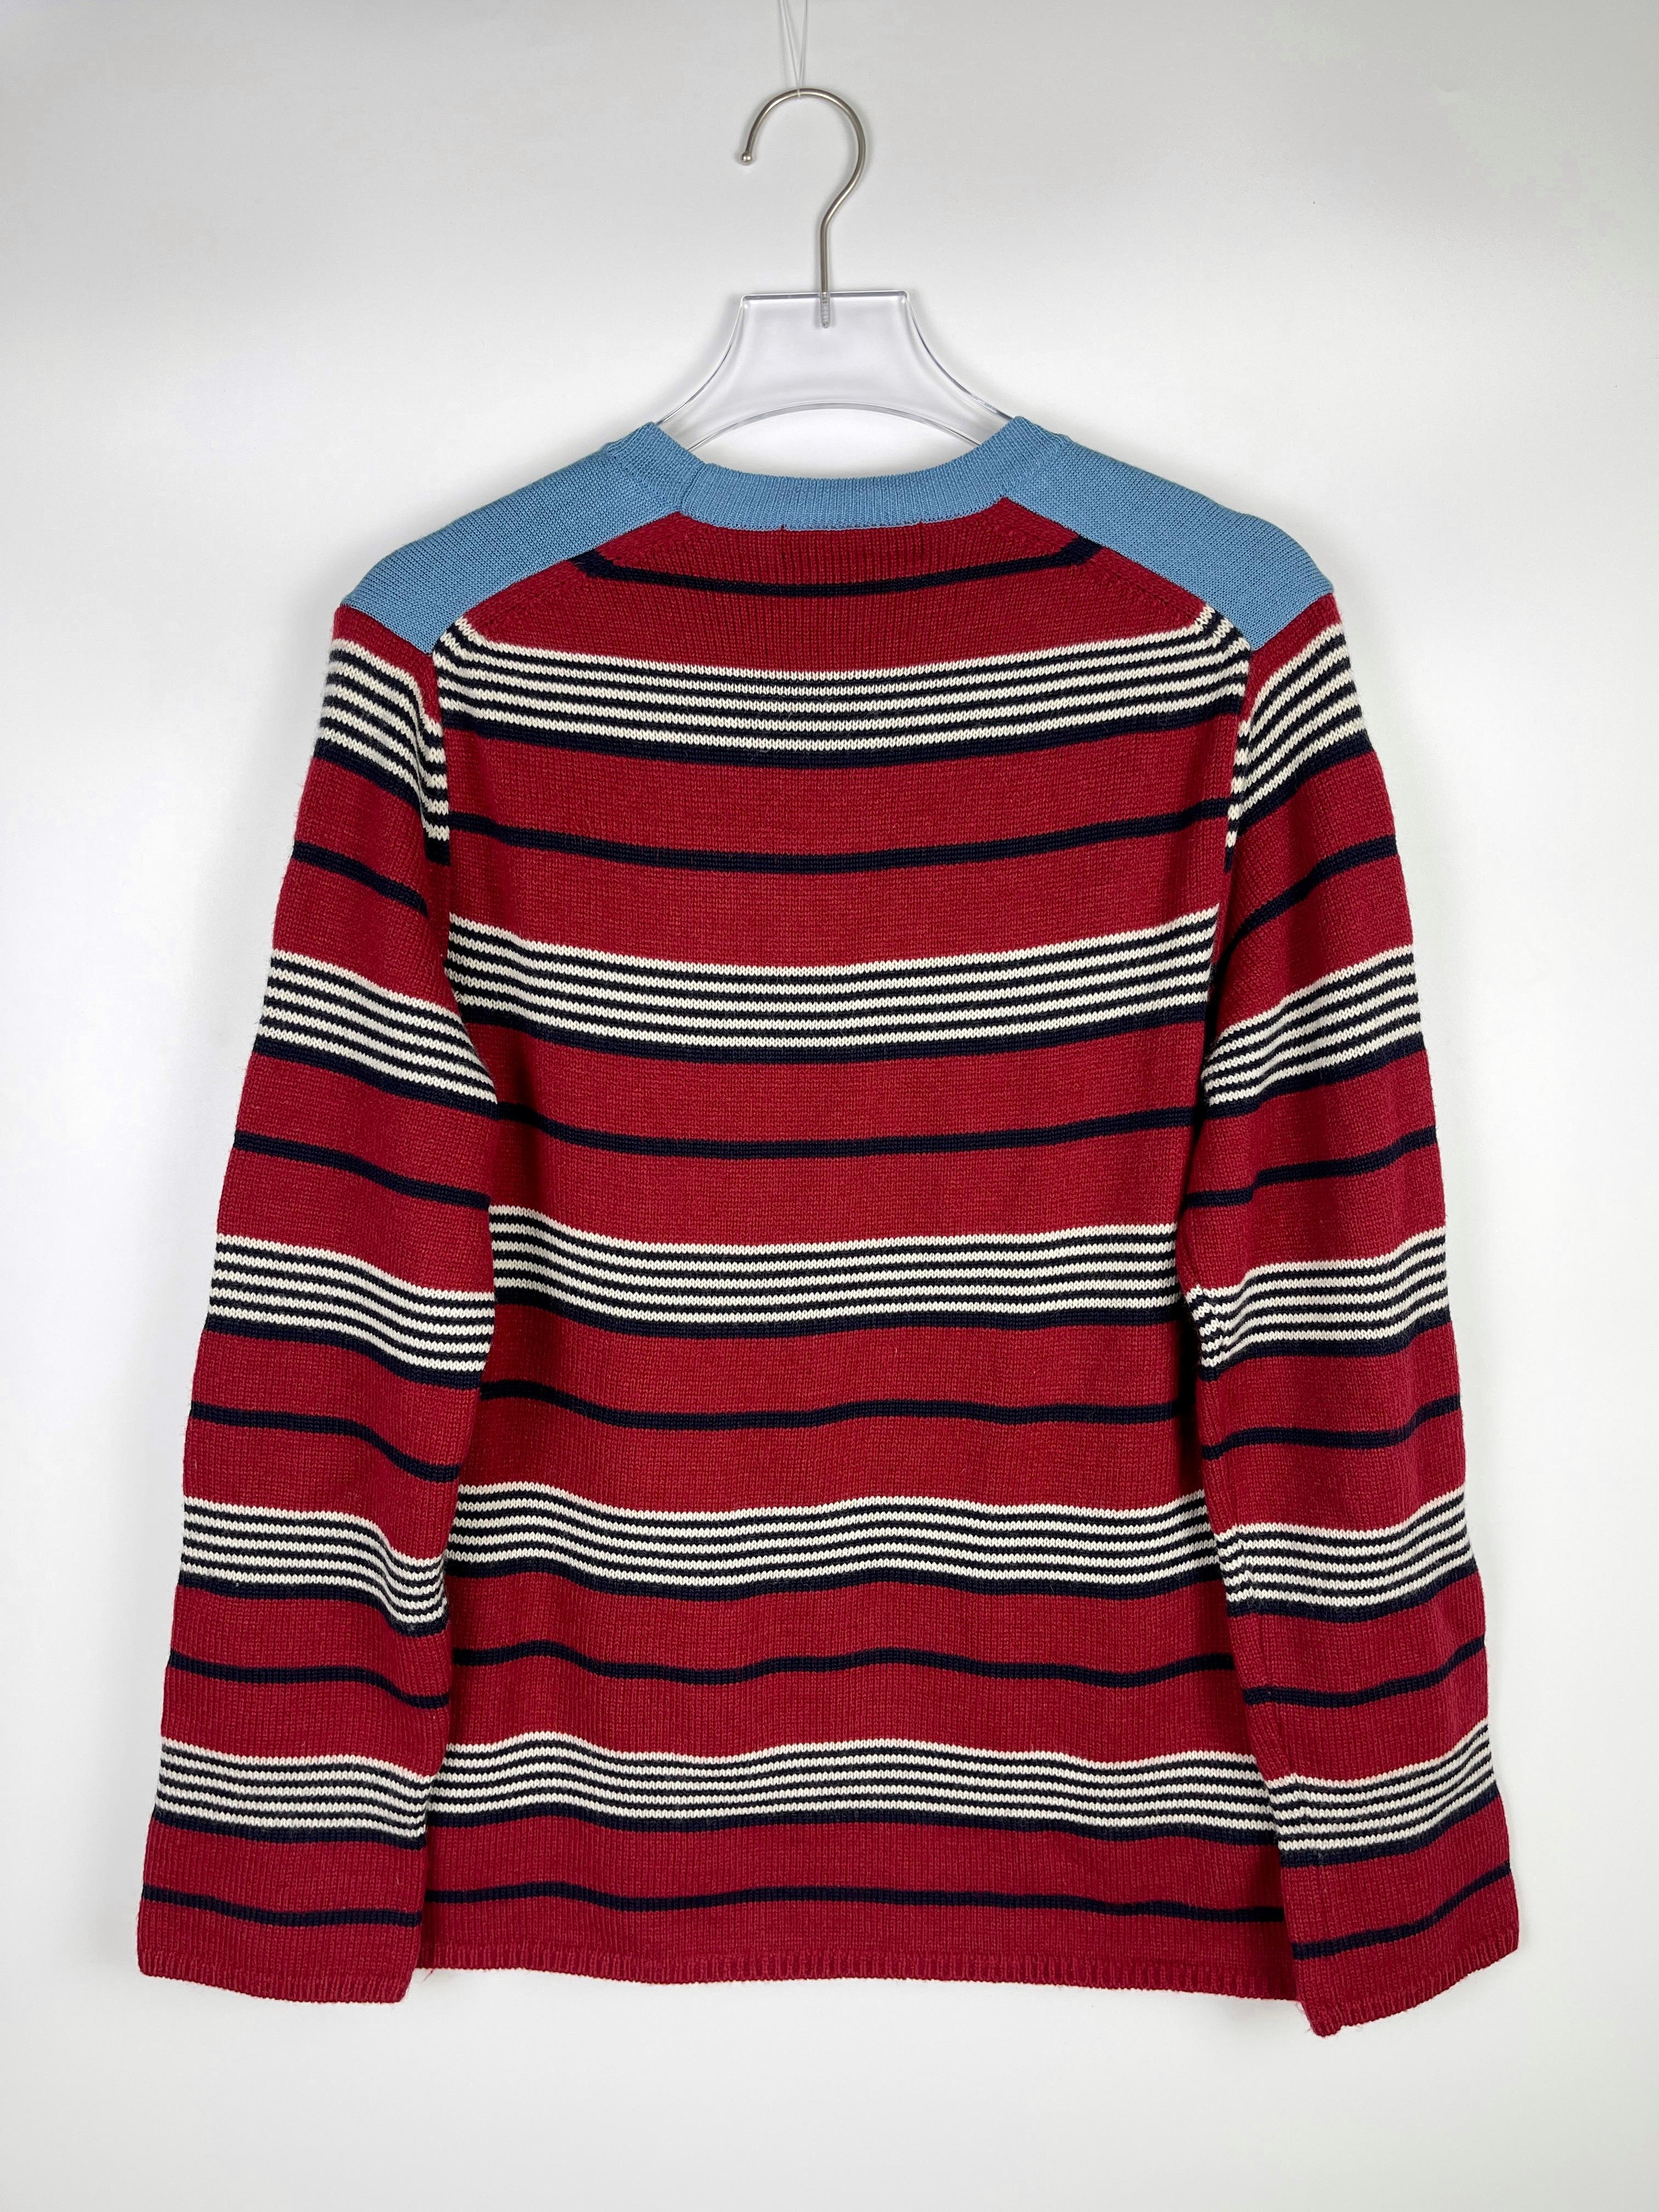 Comme des Garcons Homme Deux A/W2012 Abstract Cavalier Sweater  In Excellent Condition For Sale In Tương Mai Ward, Hoang Mai District